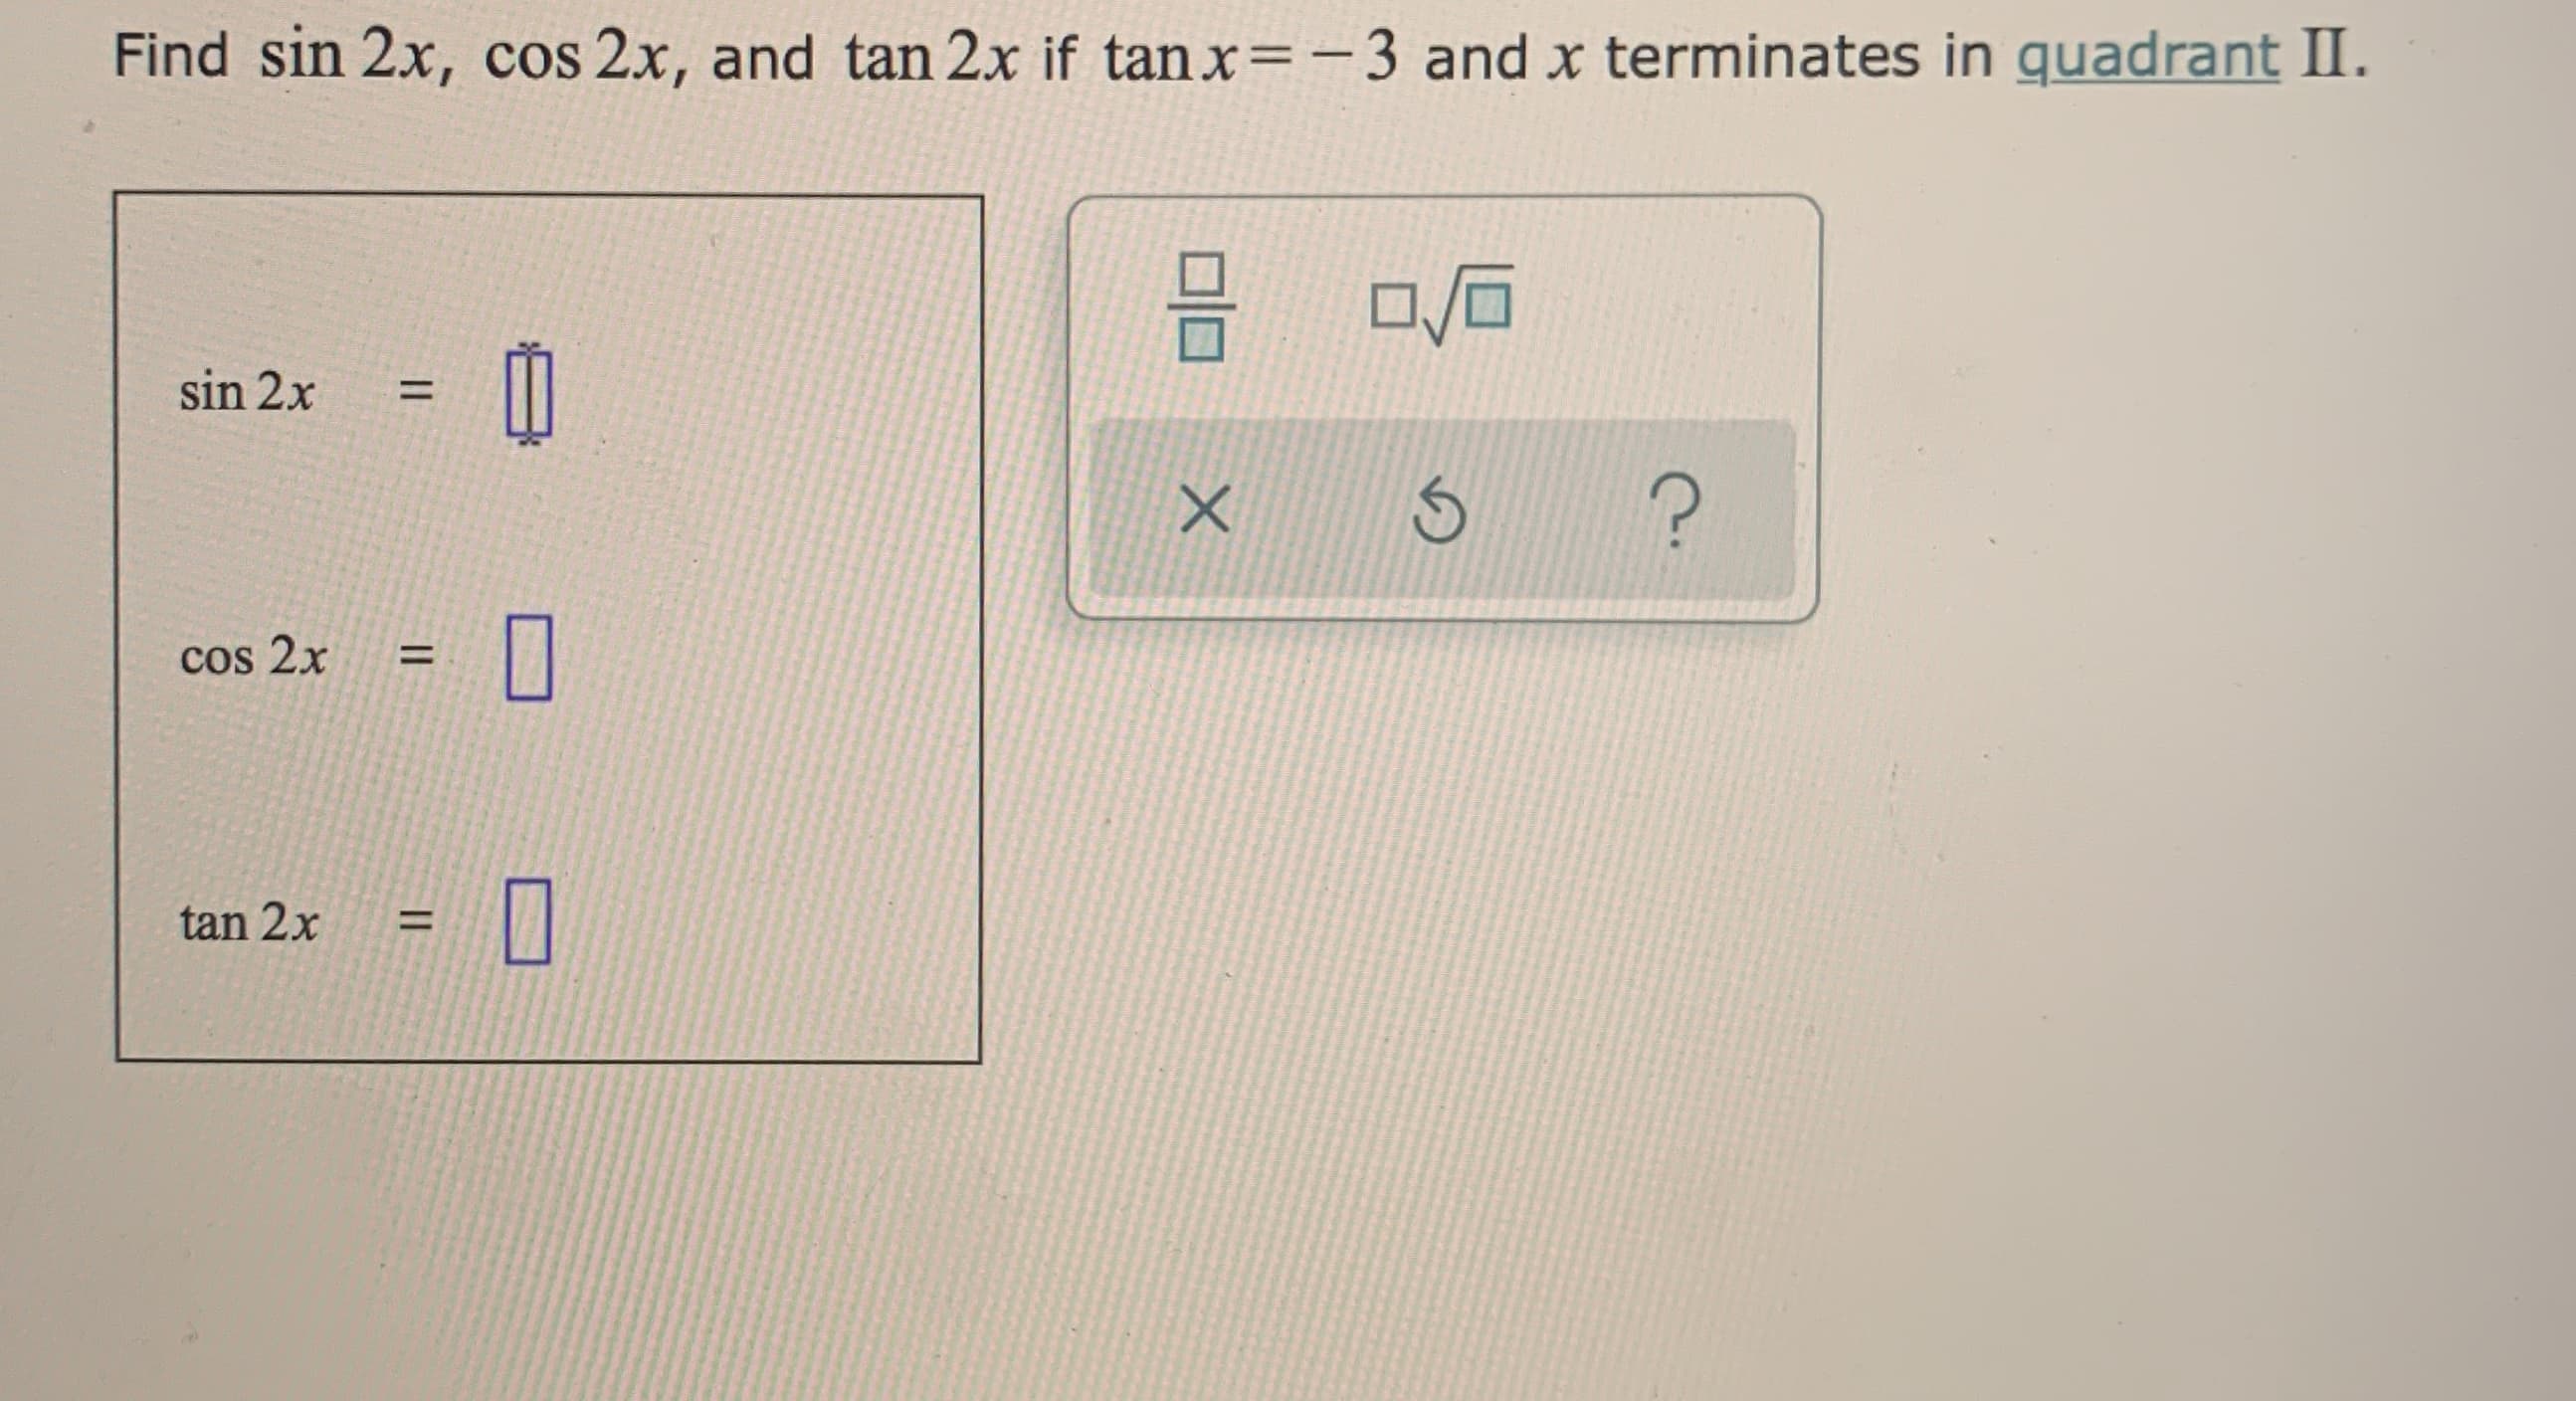 Find sin 2x,
cos 2x, and tan 2x if tanx=-3 and x terminates in quadrant II.
